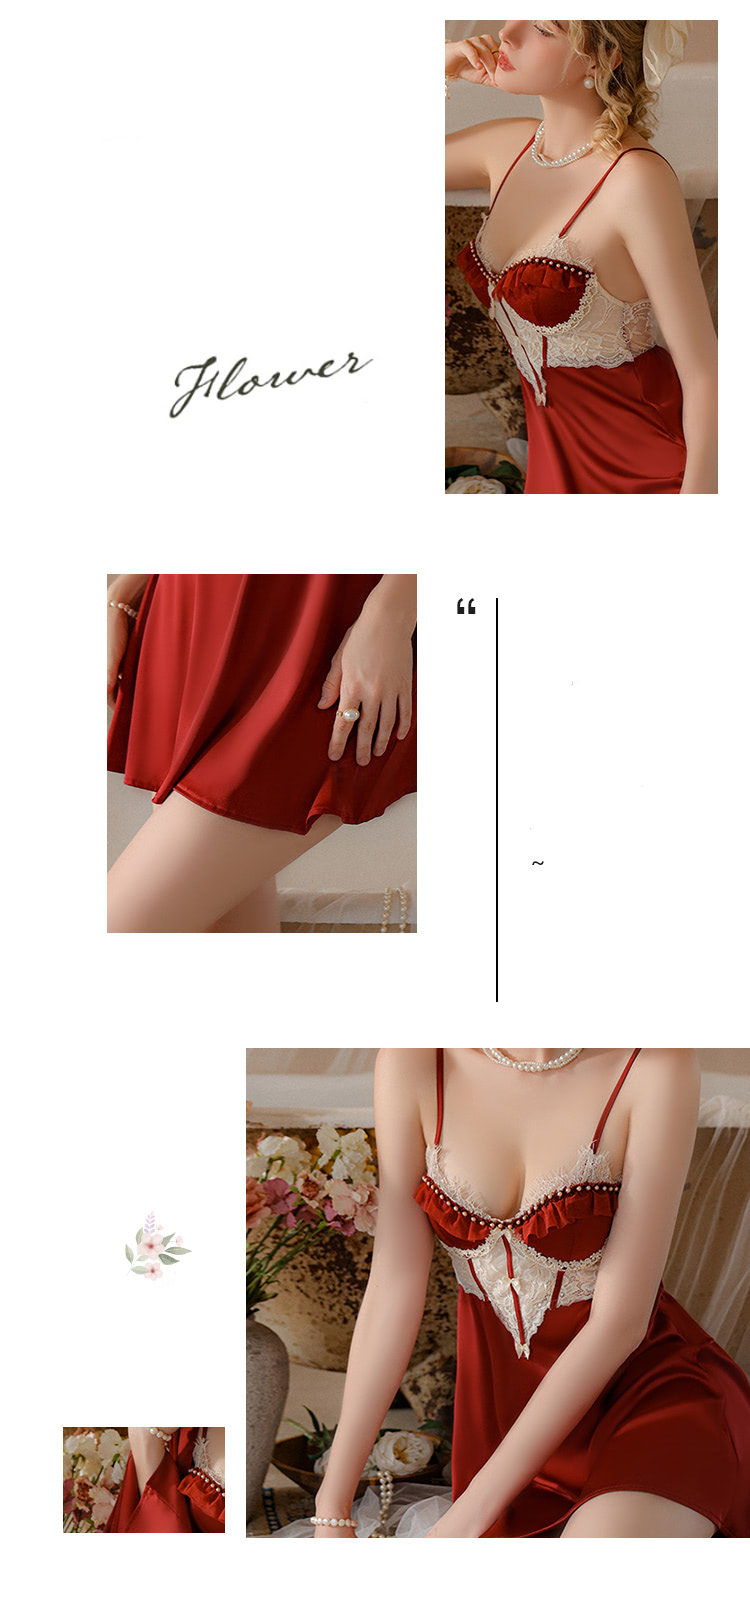 Low-Cut-V-neck-Red-Lace-Open-Back-Slip-Nightgown-Chemise-Slip-Dress08